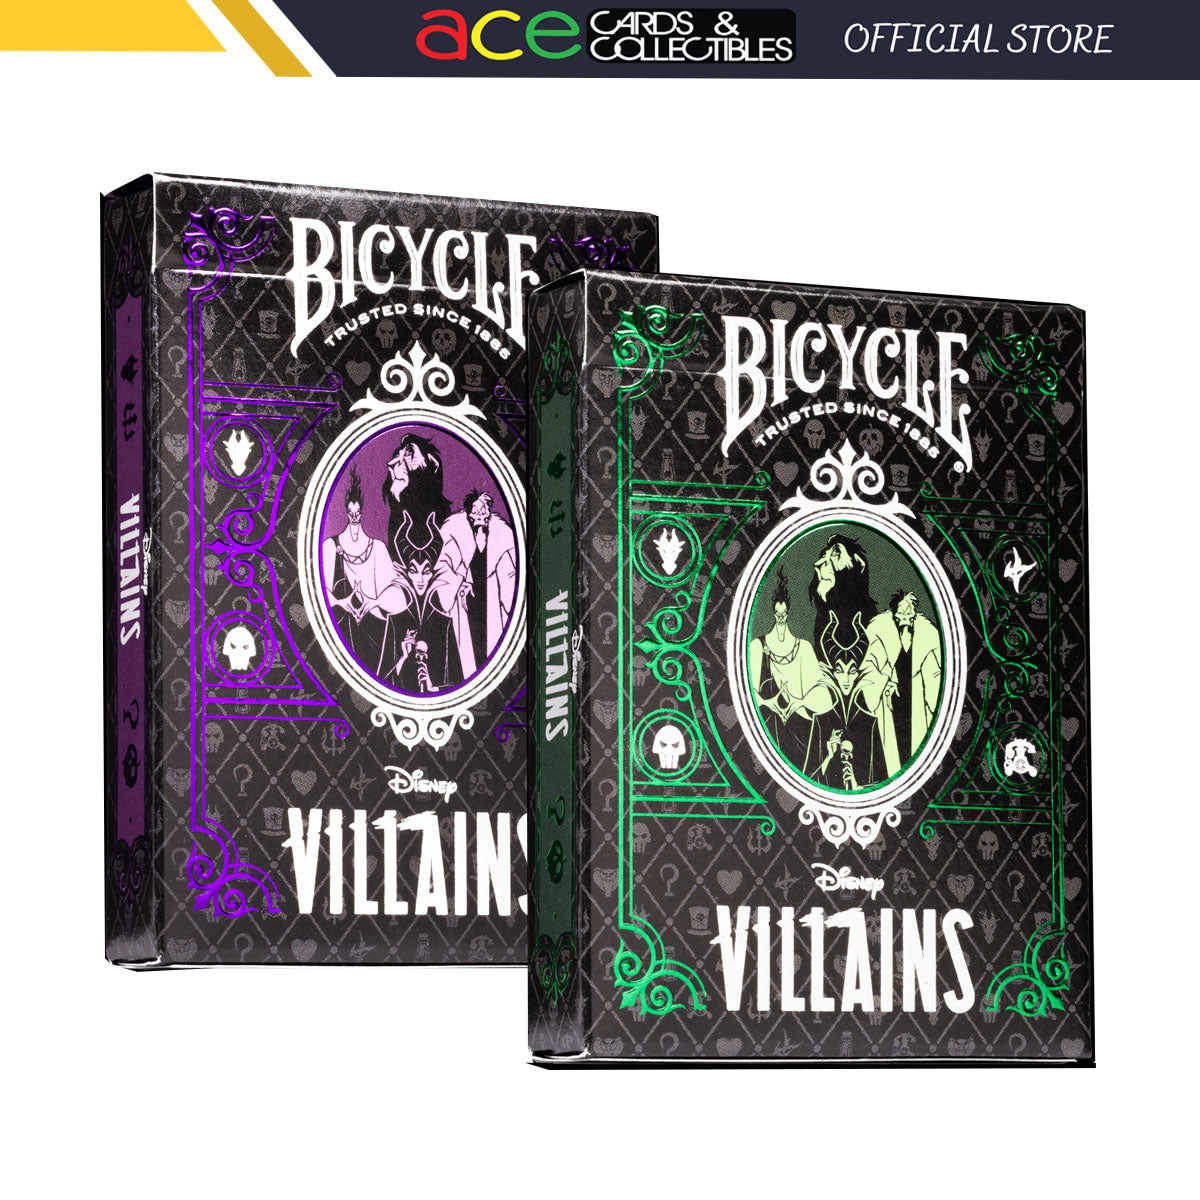 Bicycle Disney Villains Inspired Playing Cards-Purple-United States Playing Cards Company-Ace Cards & Collectibles